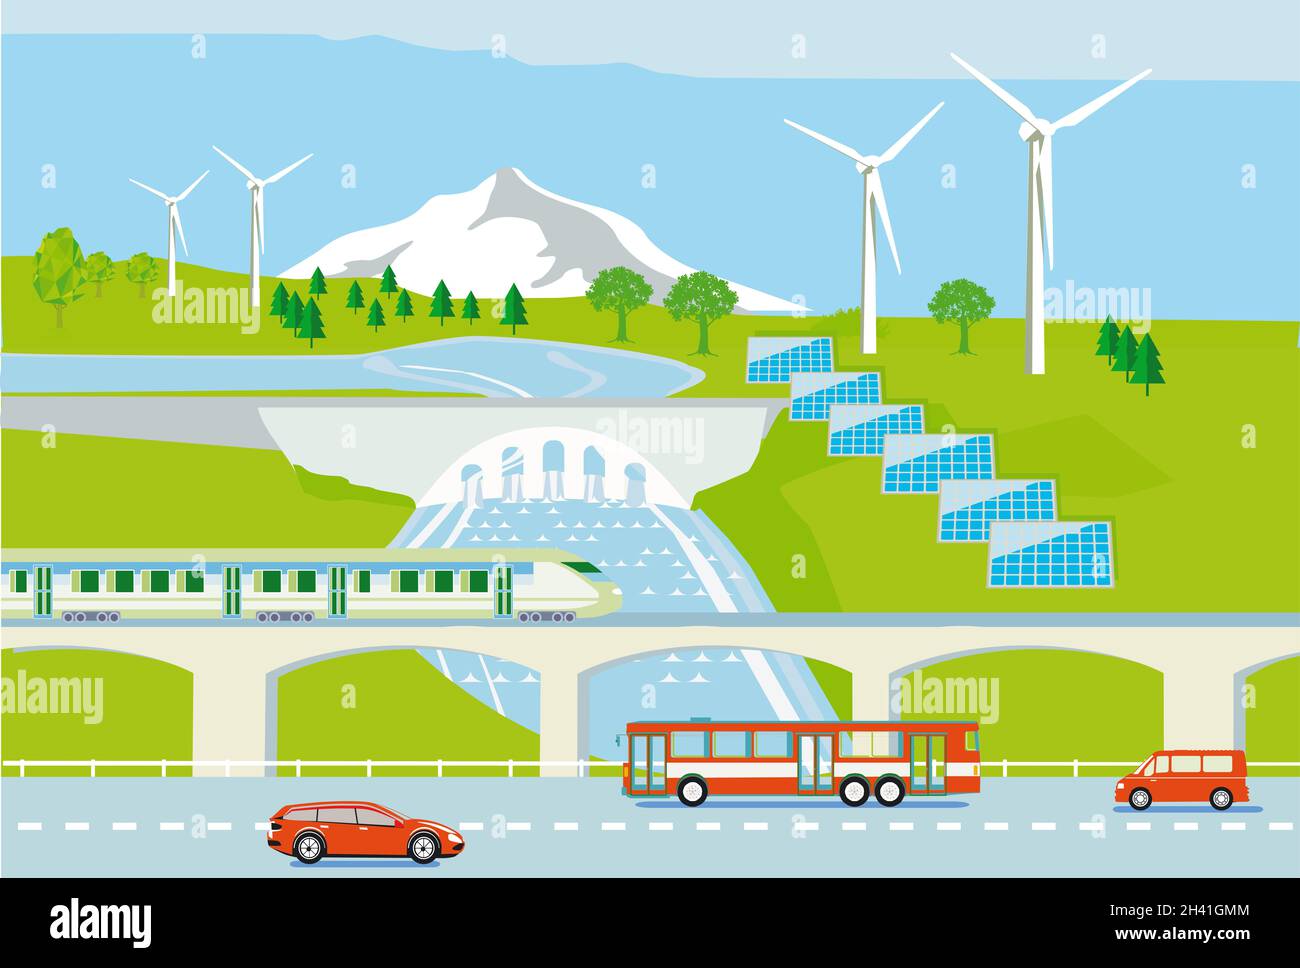 Wind turbines, hydropower and solar power, with electric vehicles and passenger train, illustration Stock Photo